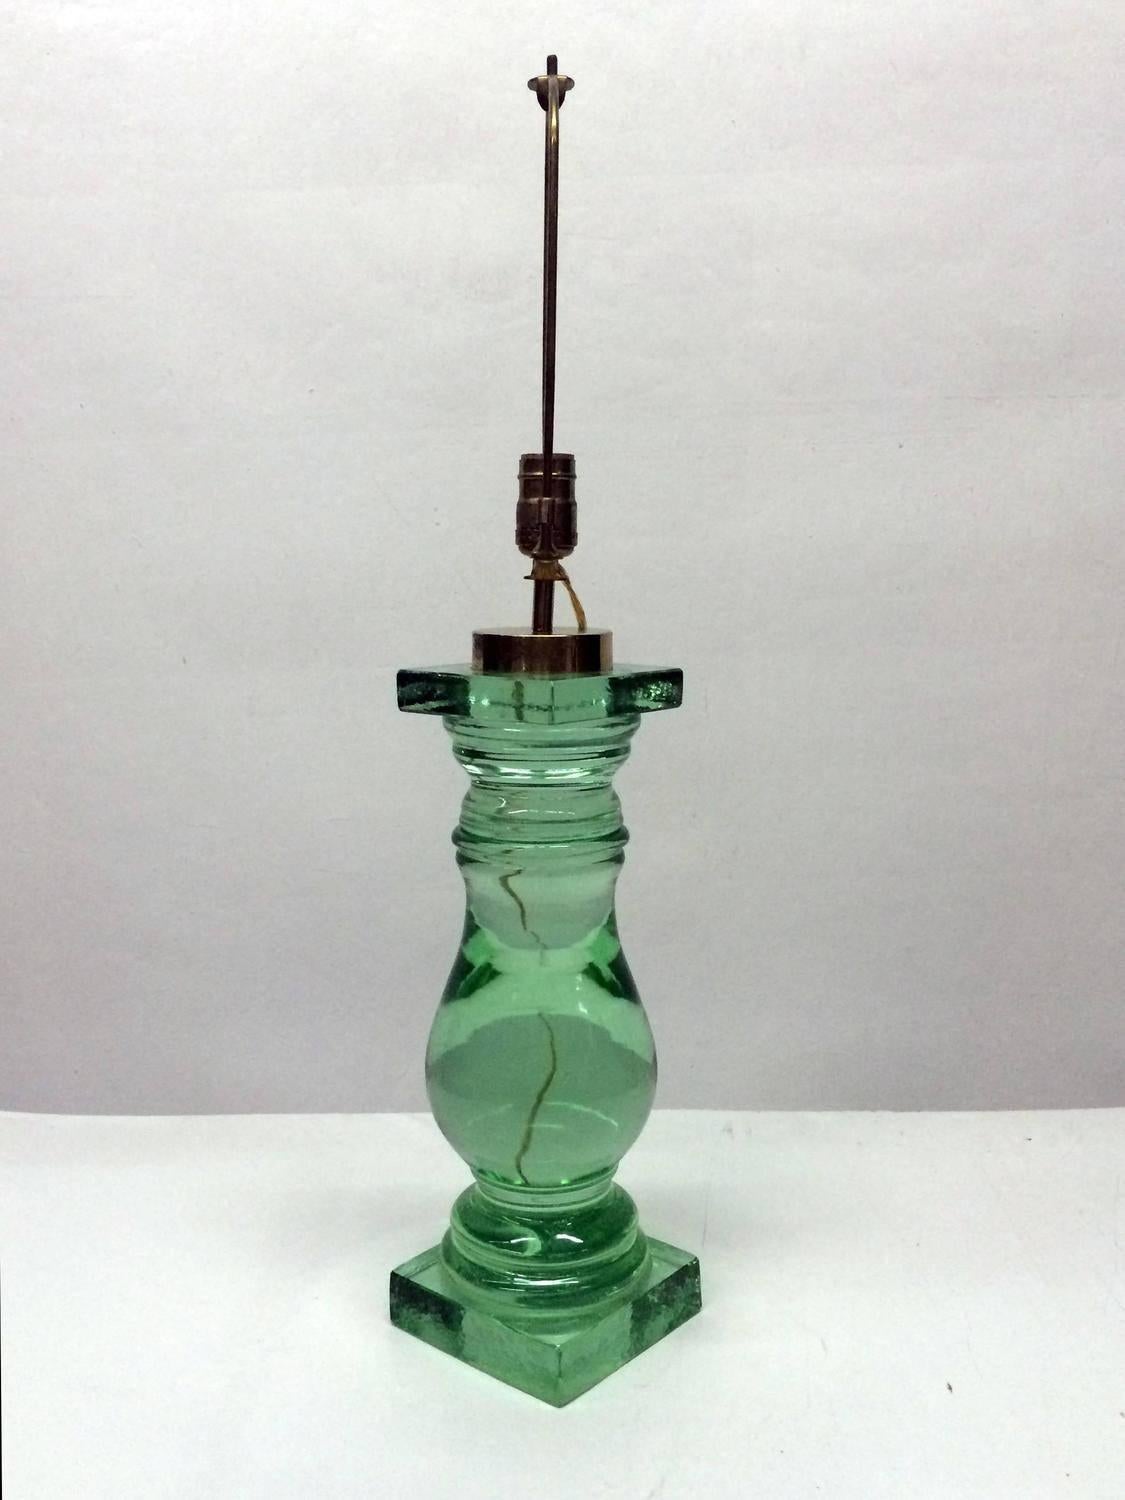 This green Murano glass table lamp has the elegant shape of a turned spindle or carved column. The glass lamp base is finished with brass fittings.
It is made in a big chunk of glass.